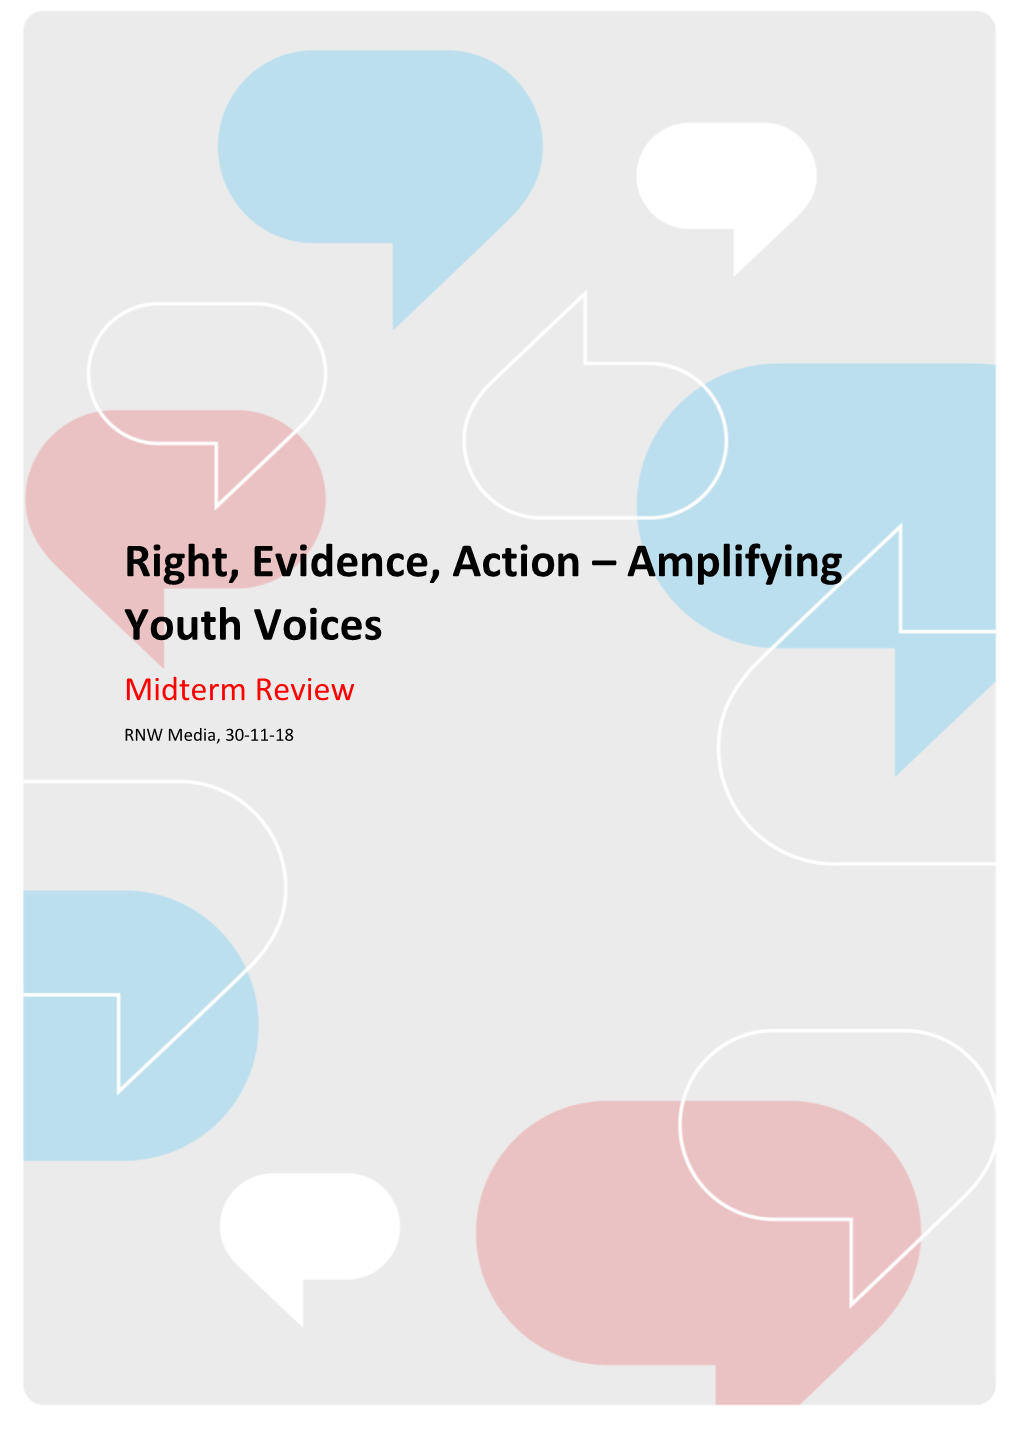 Rights, Evidence, Action Midterm Review